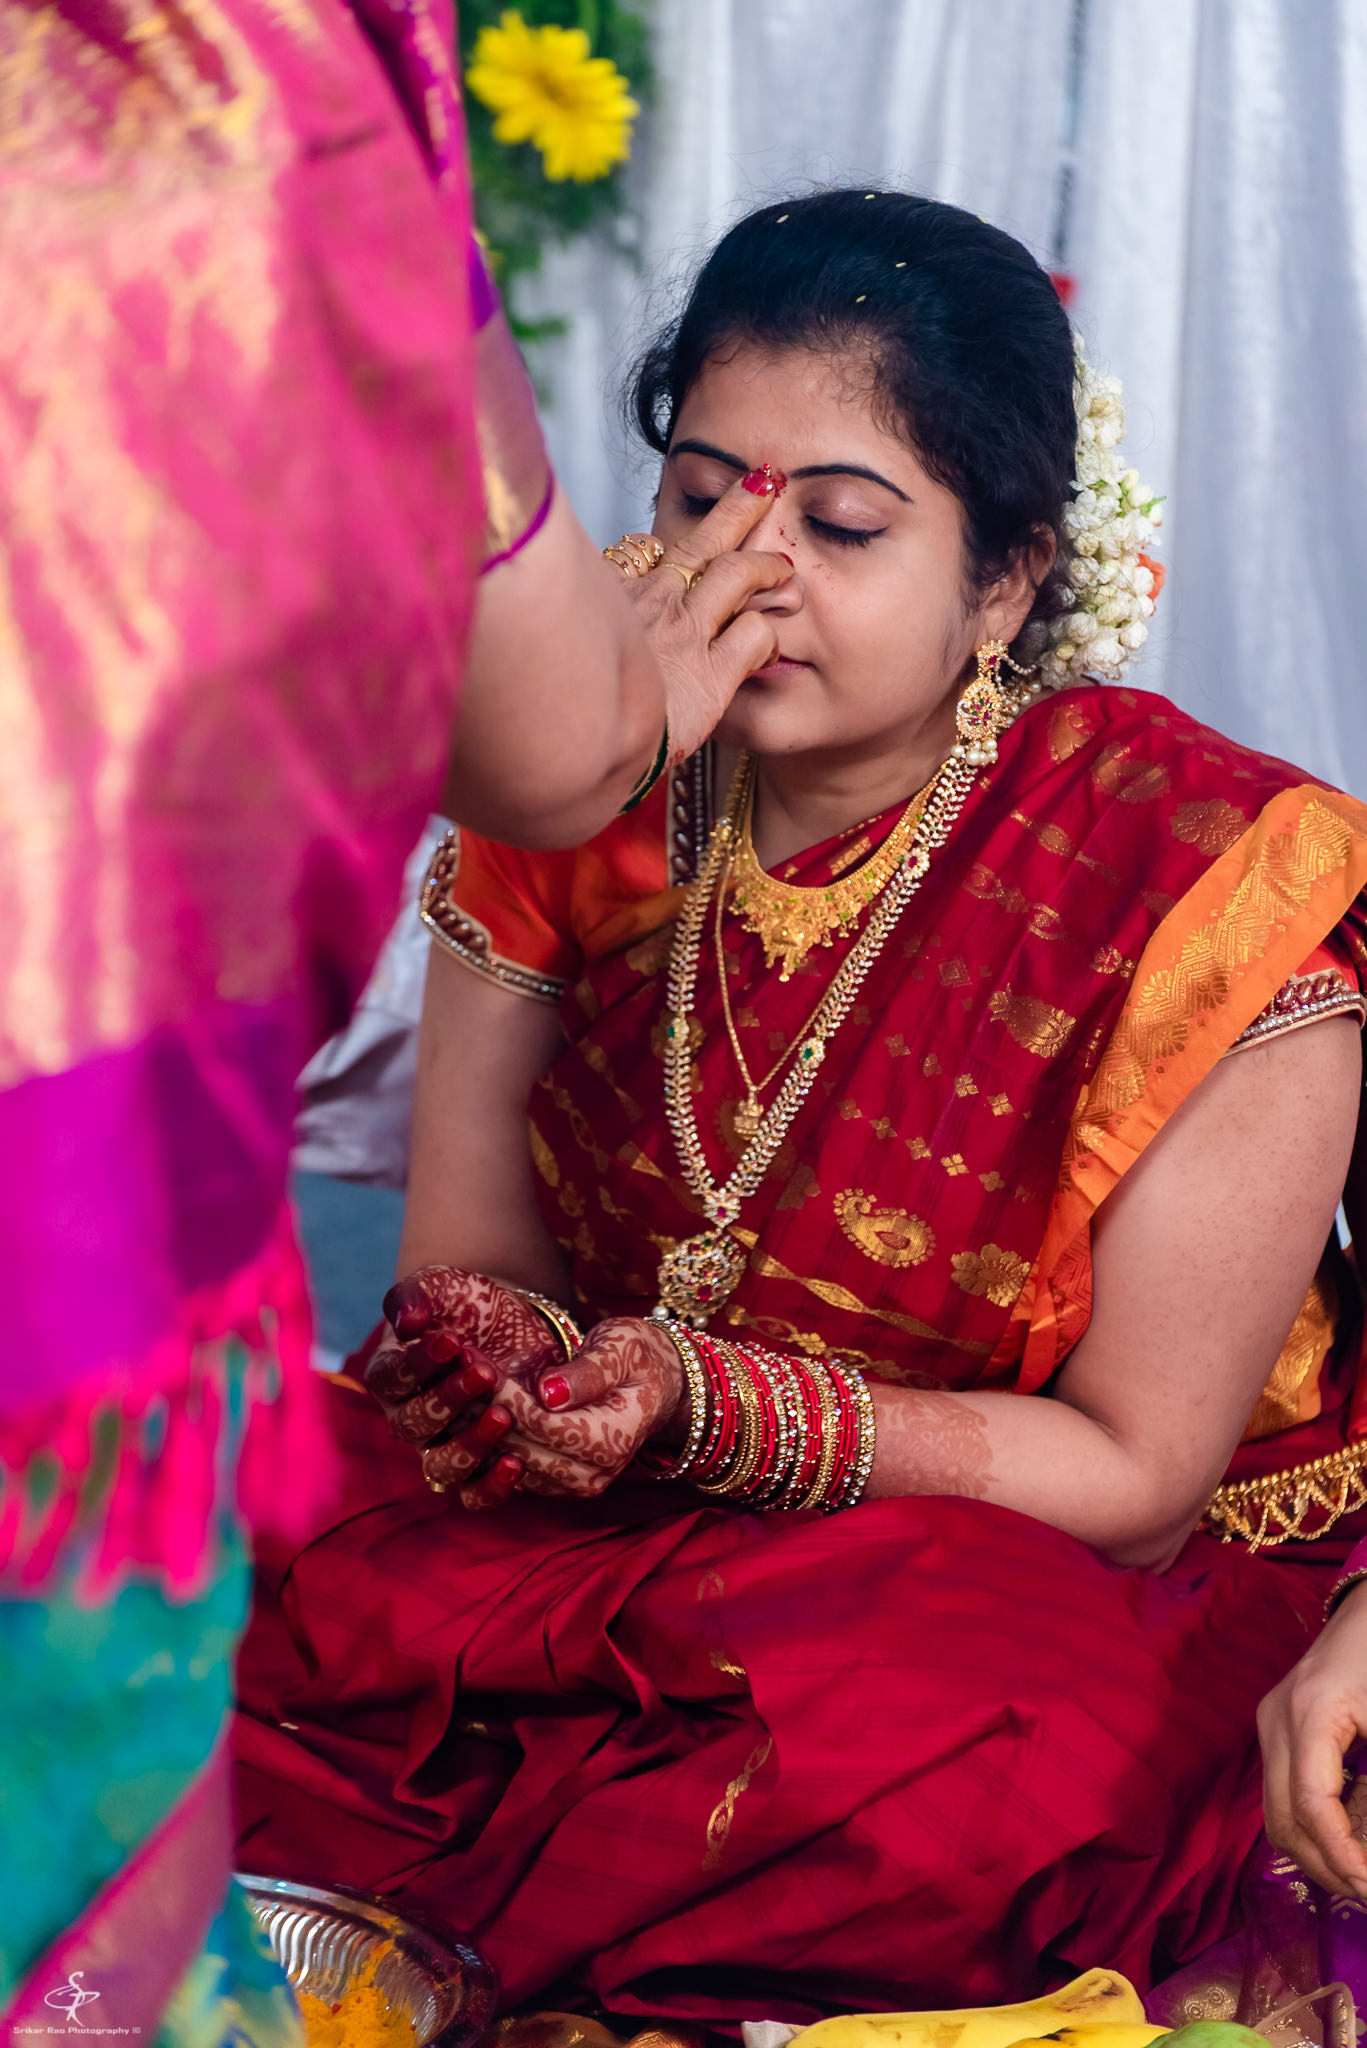 online-home-zoom-hyderabad-ringceremony-photographer--22